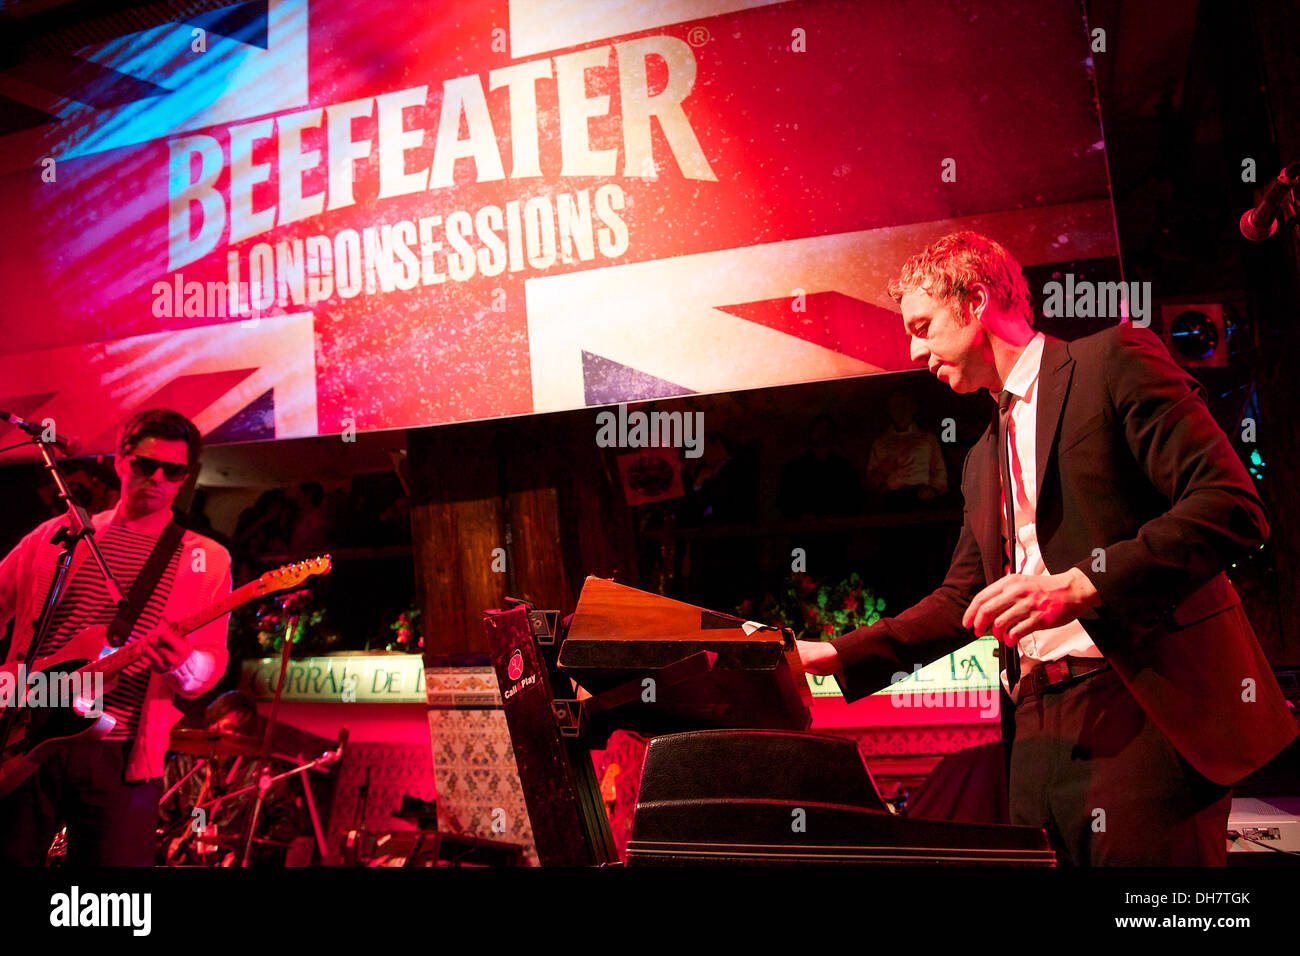 Baxter Dury performs on stage at Beefeater London Sessions Festival at El Corral de la Pacheca Madrid Spain - 20.03.12 Stock Photo